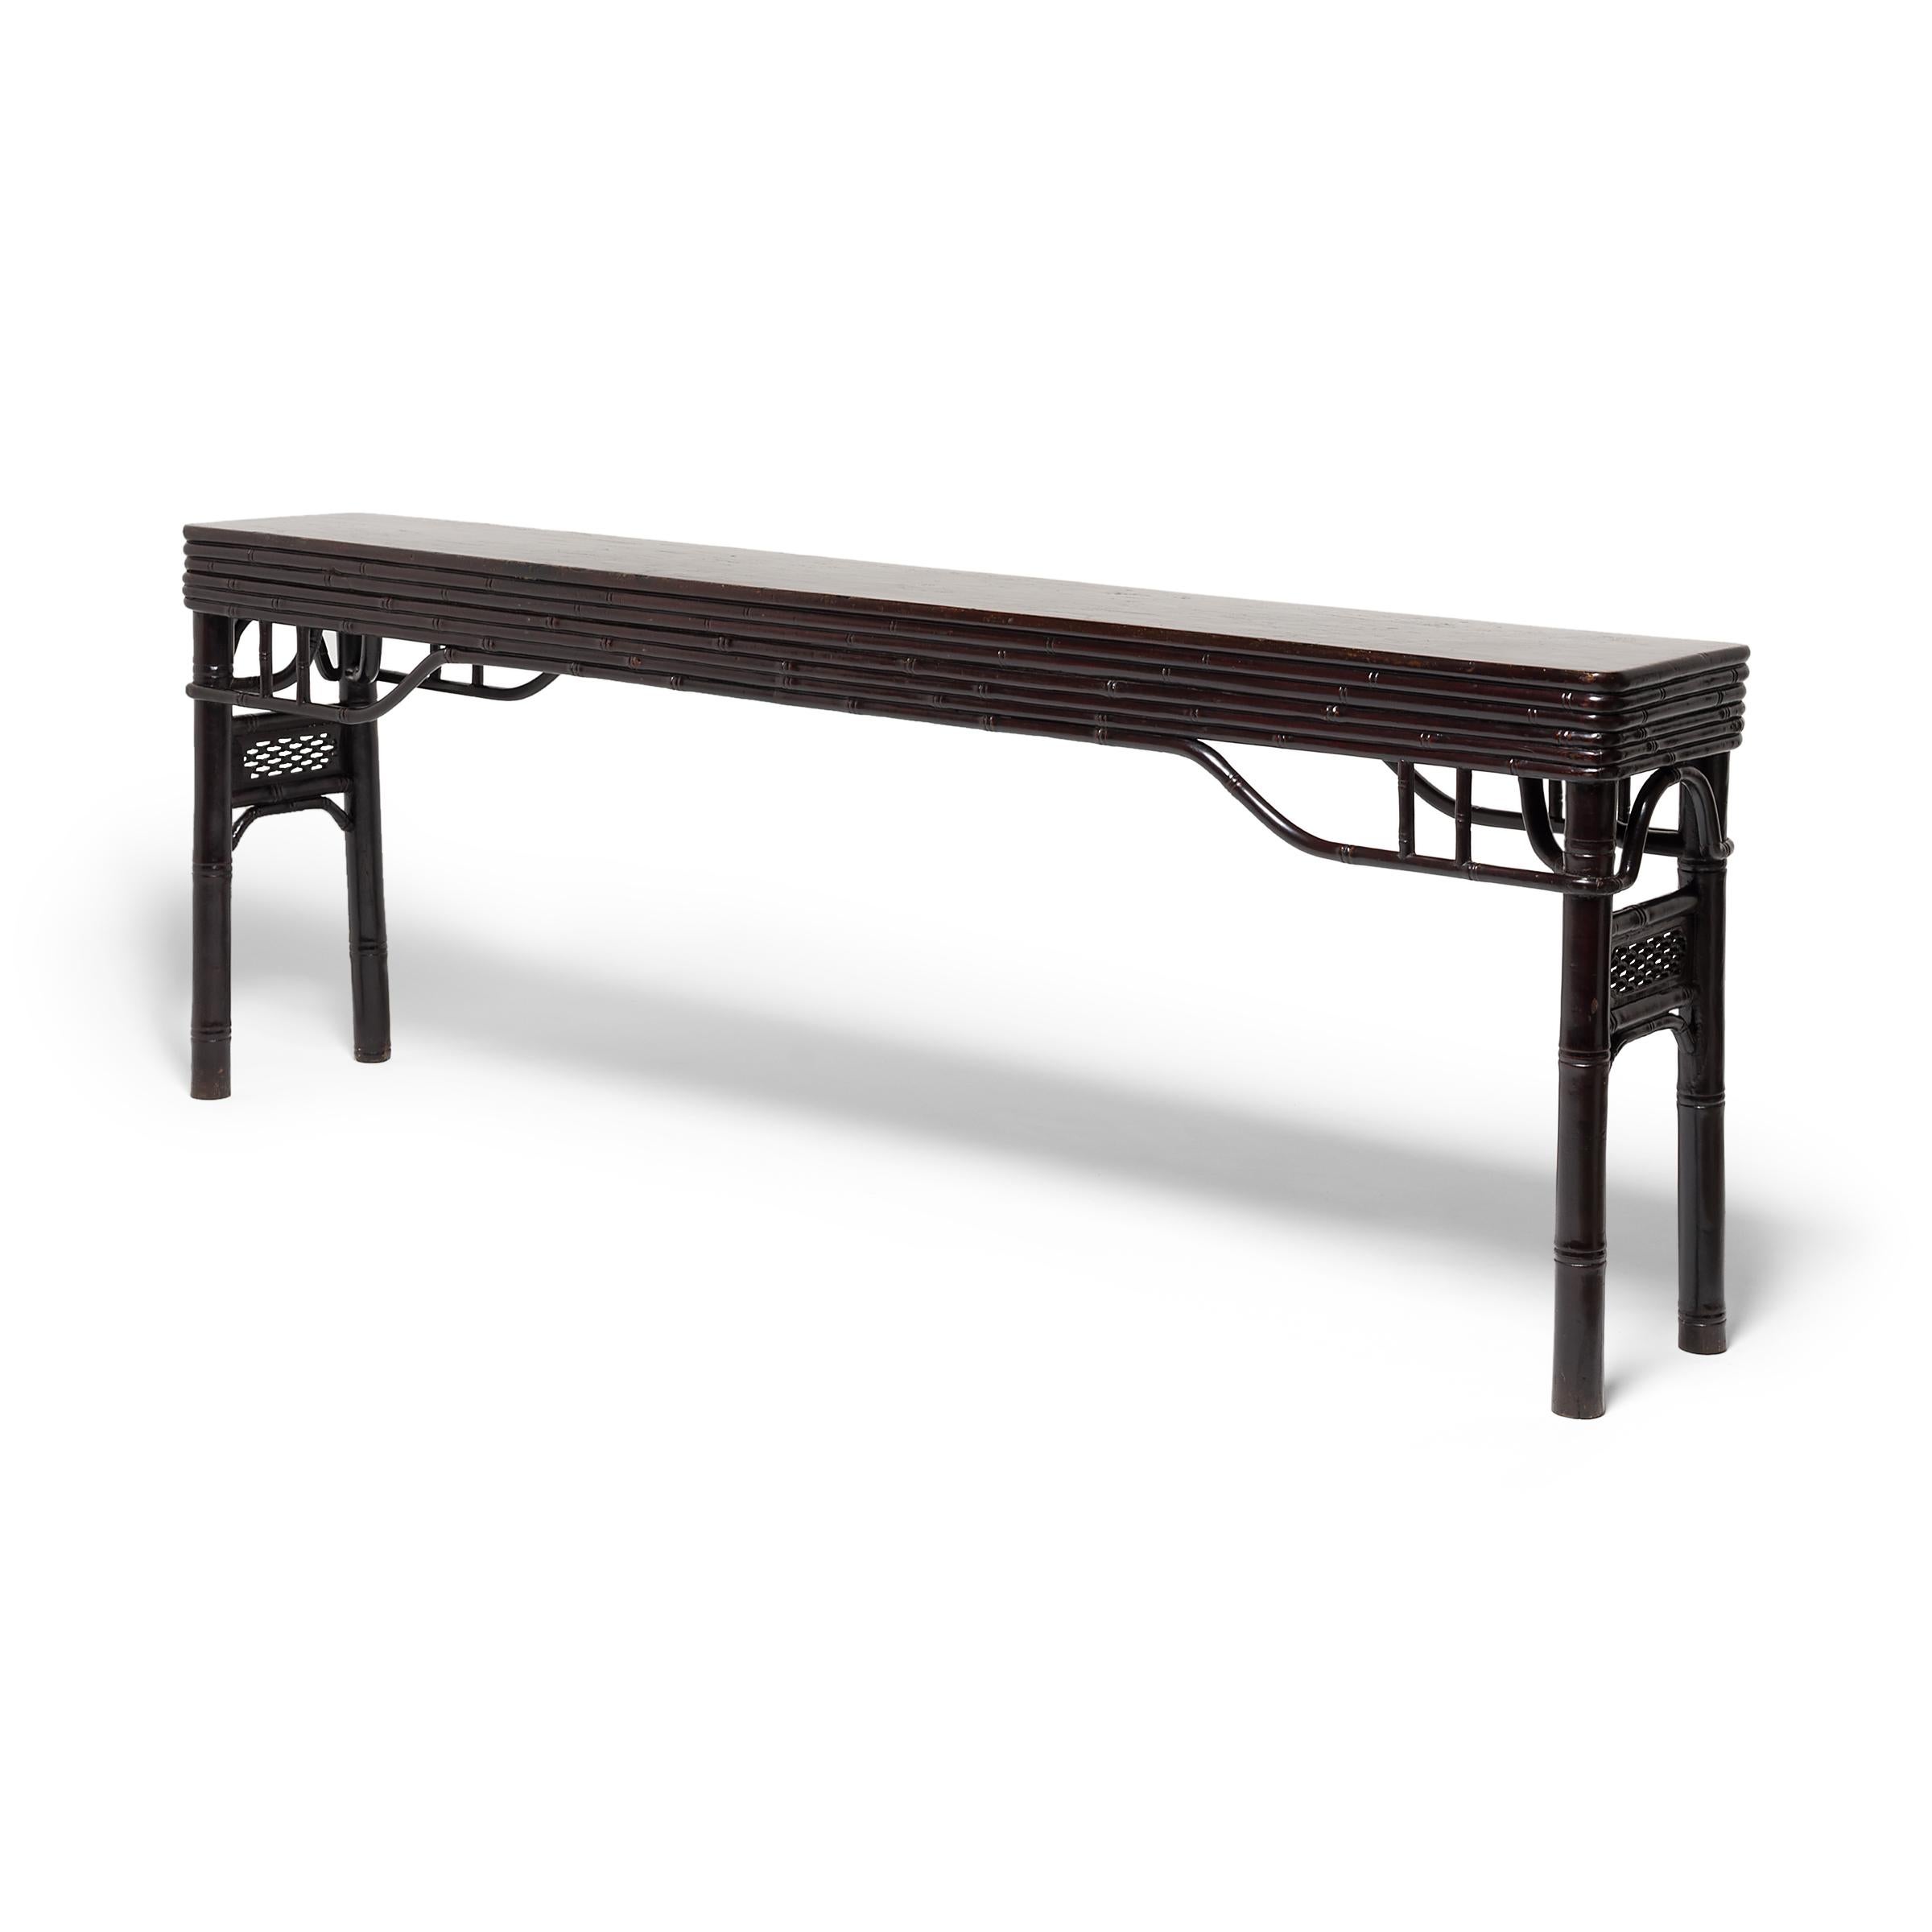 Qing Chinese Faux Bamboo Walnut Console Table, c. 1750 For Sale